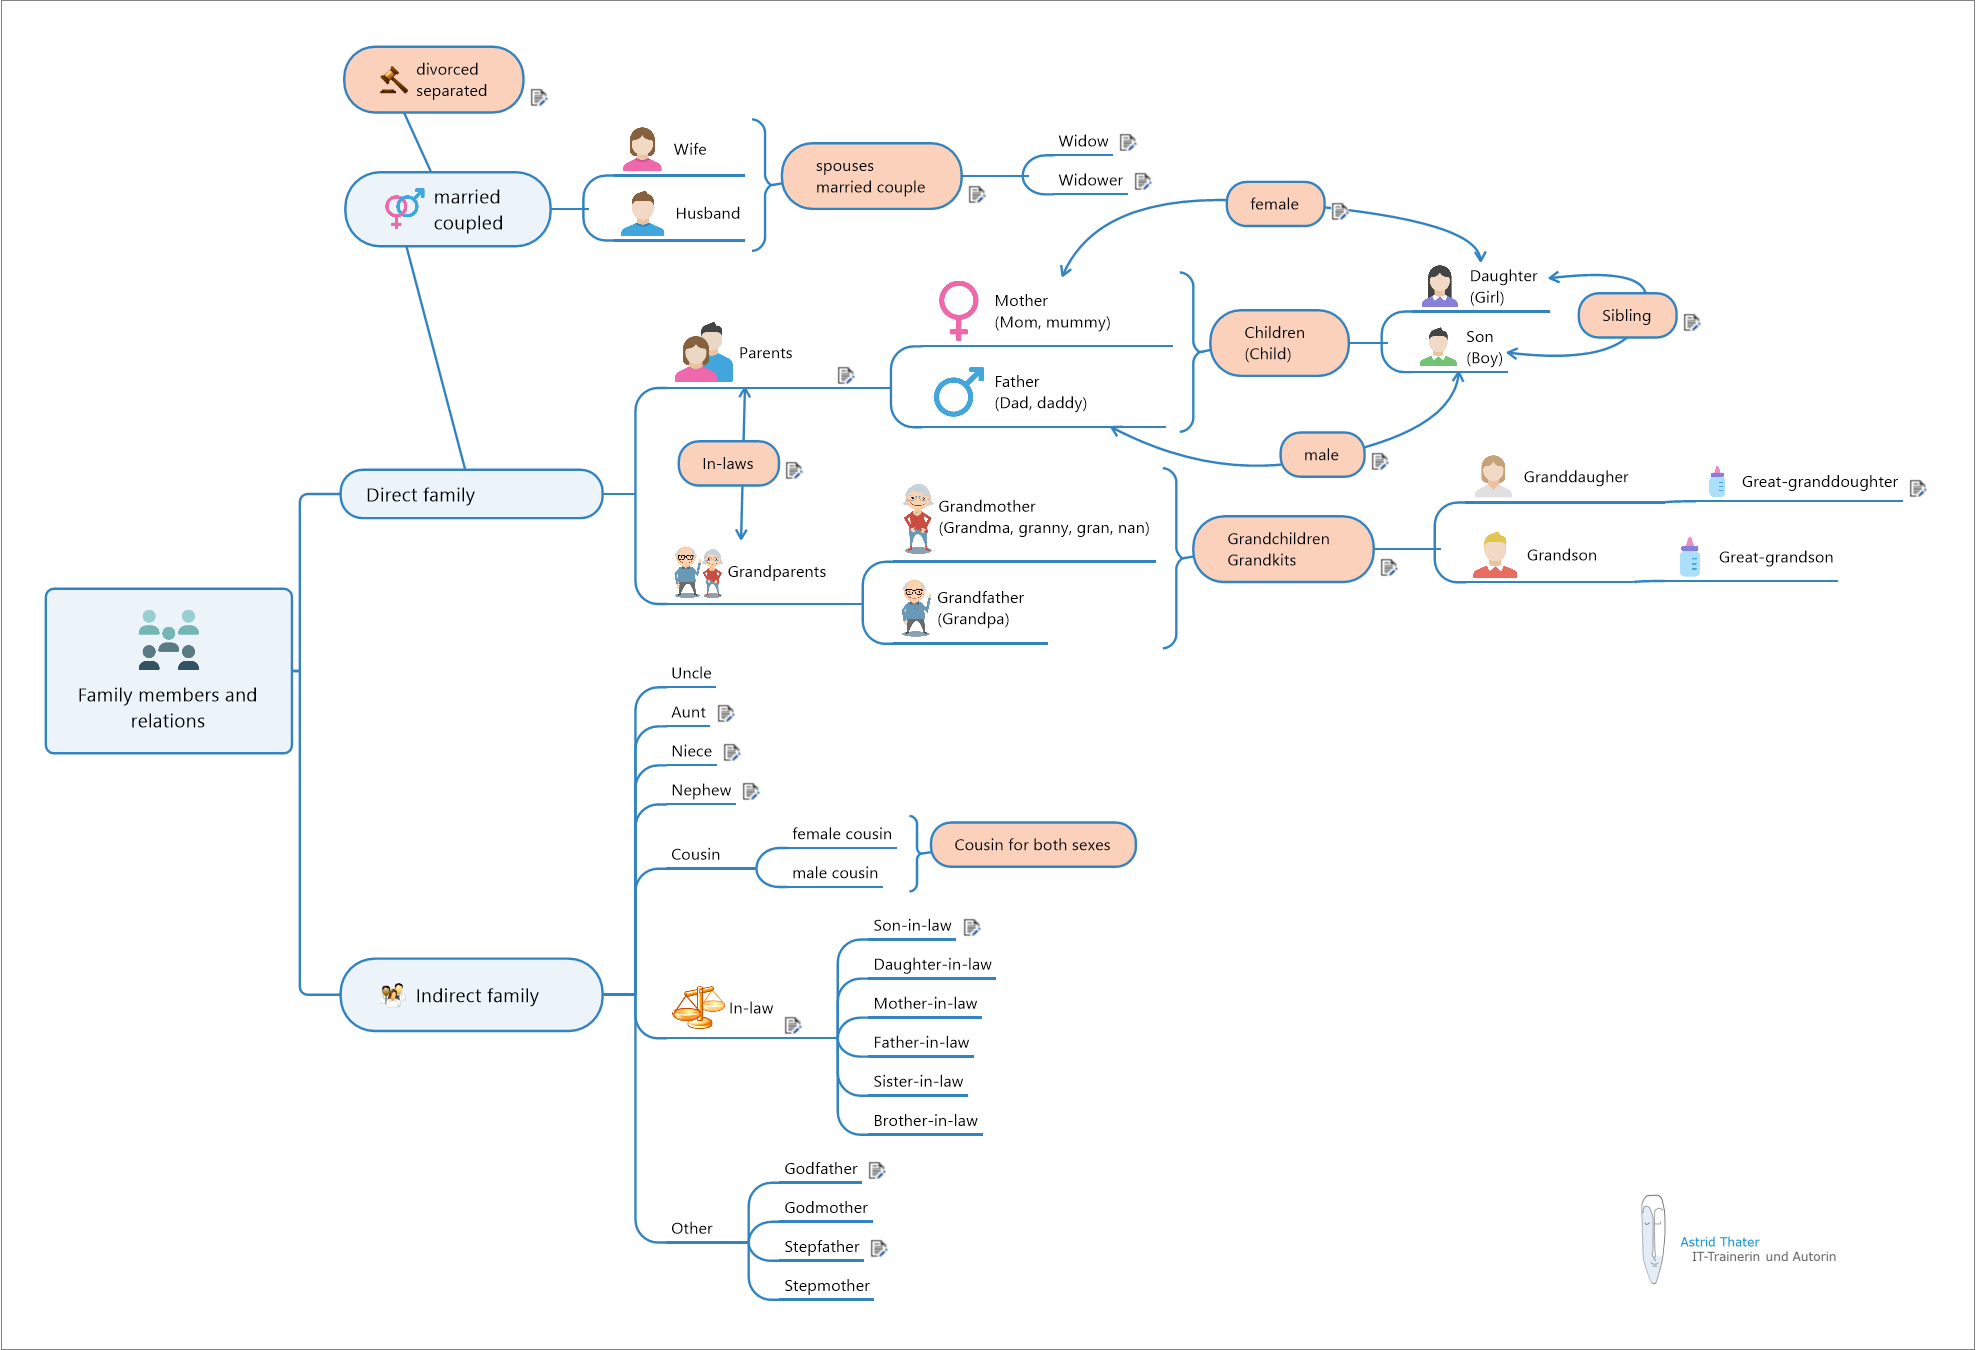 MindMap Family members and relations', (c) Astrid Thater